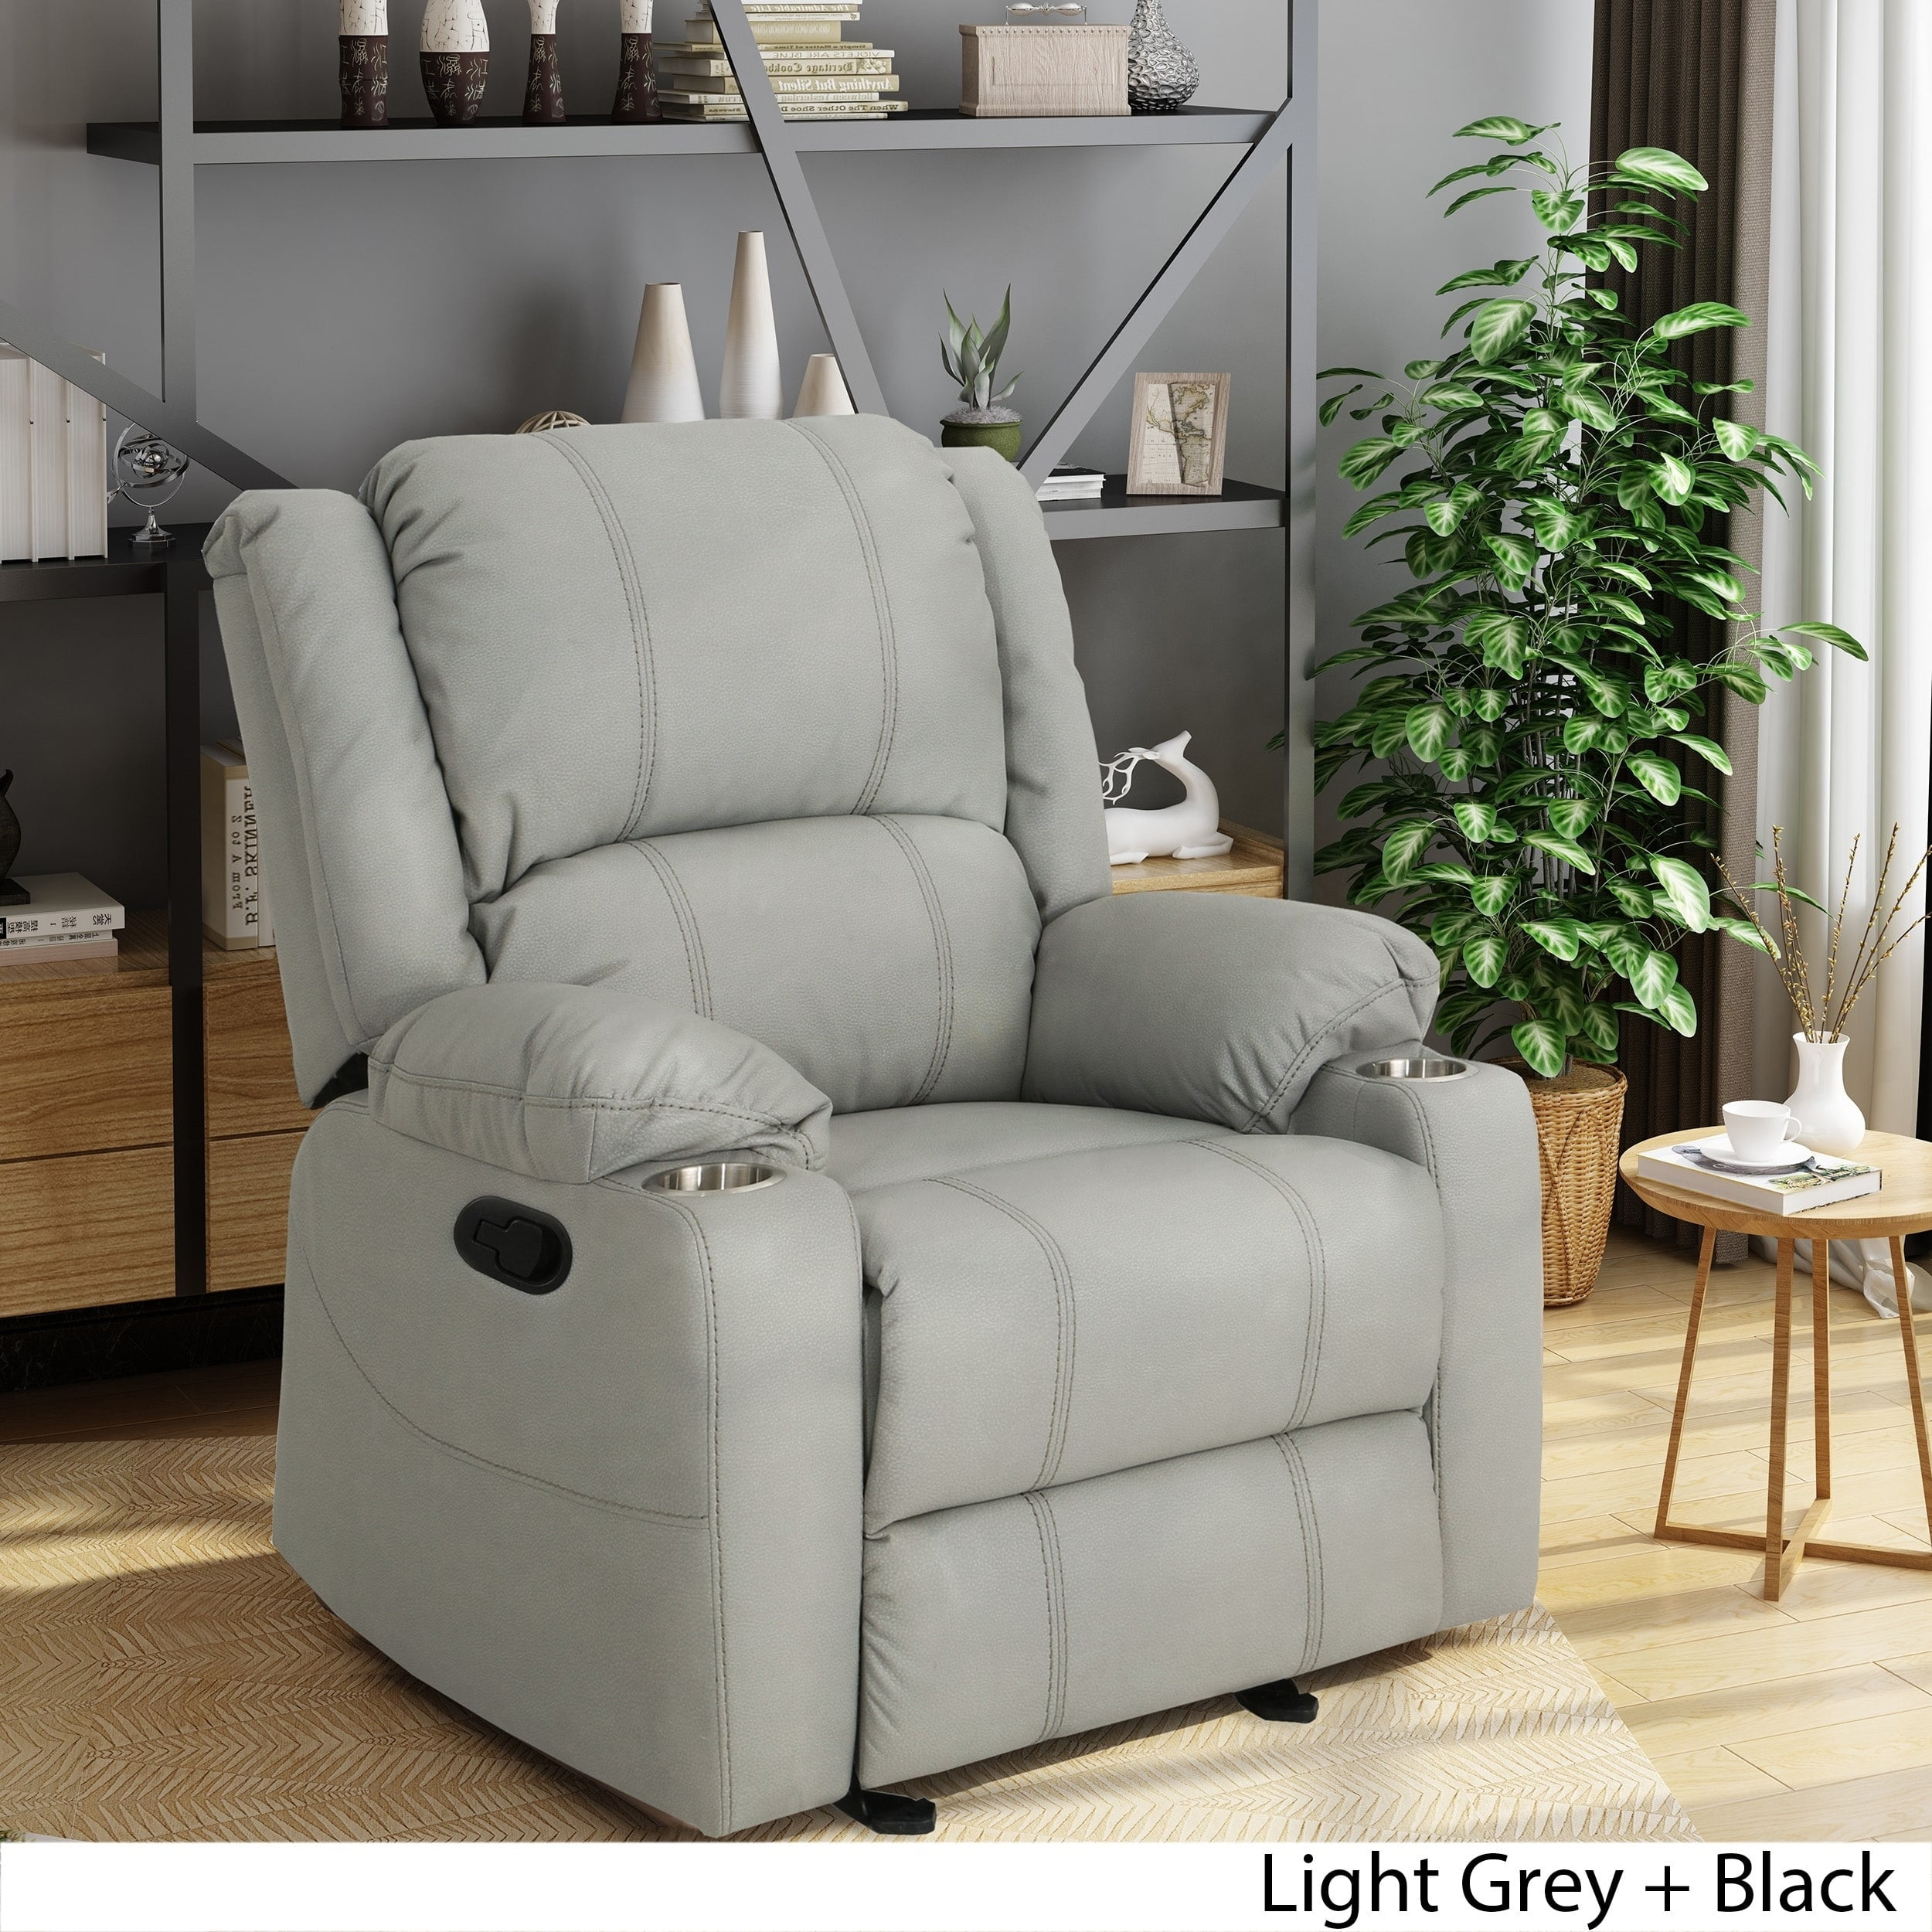 Christopher Knight Home Sarina, Traditional Leather Recliners